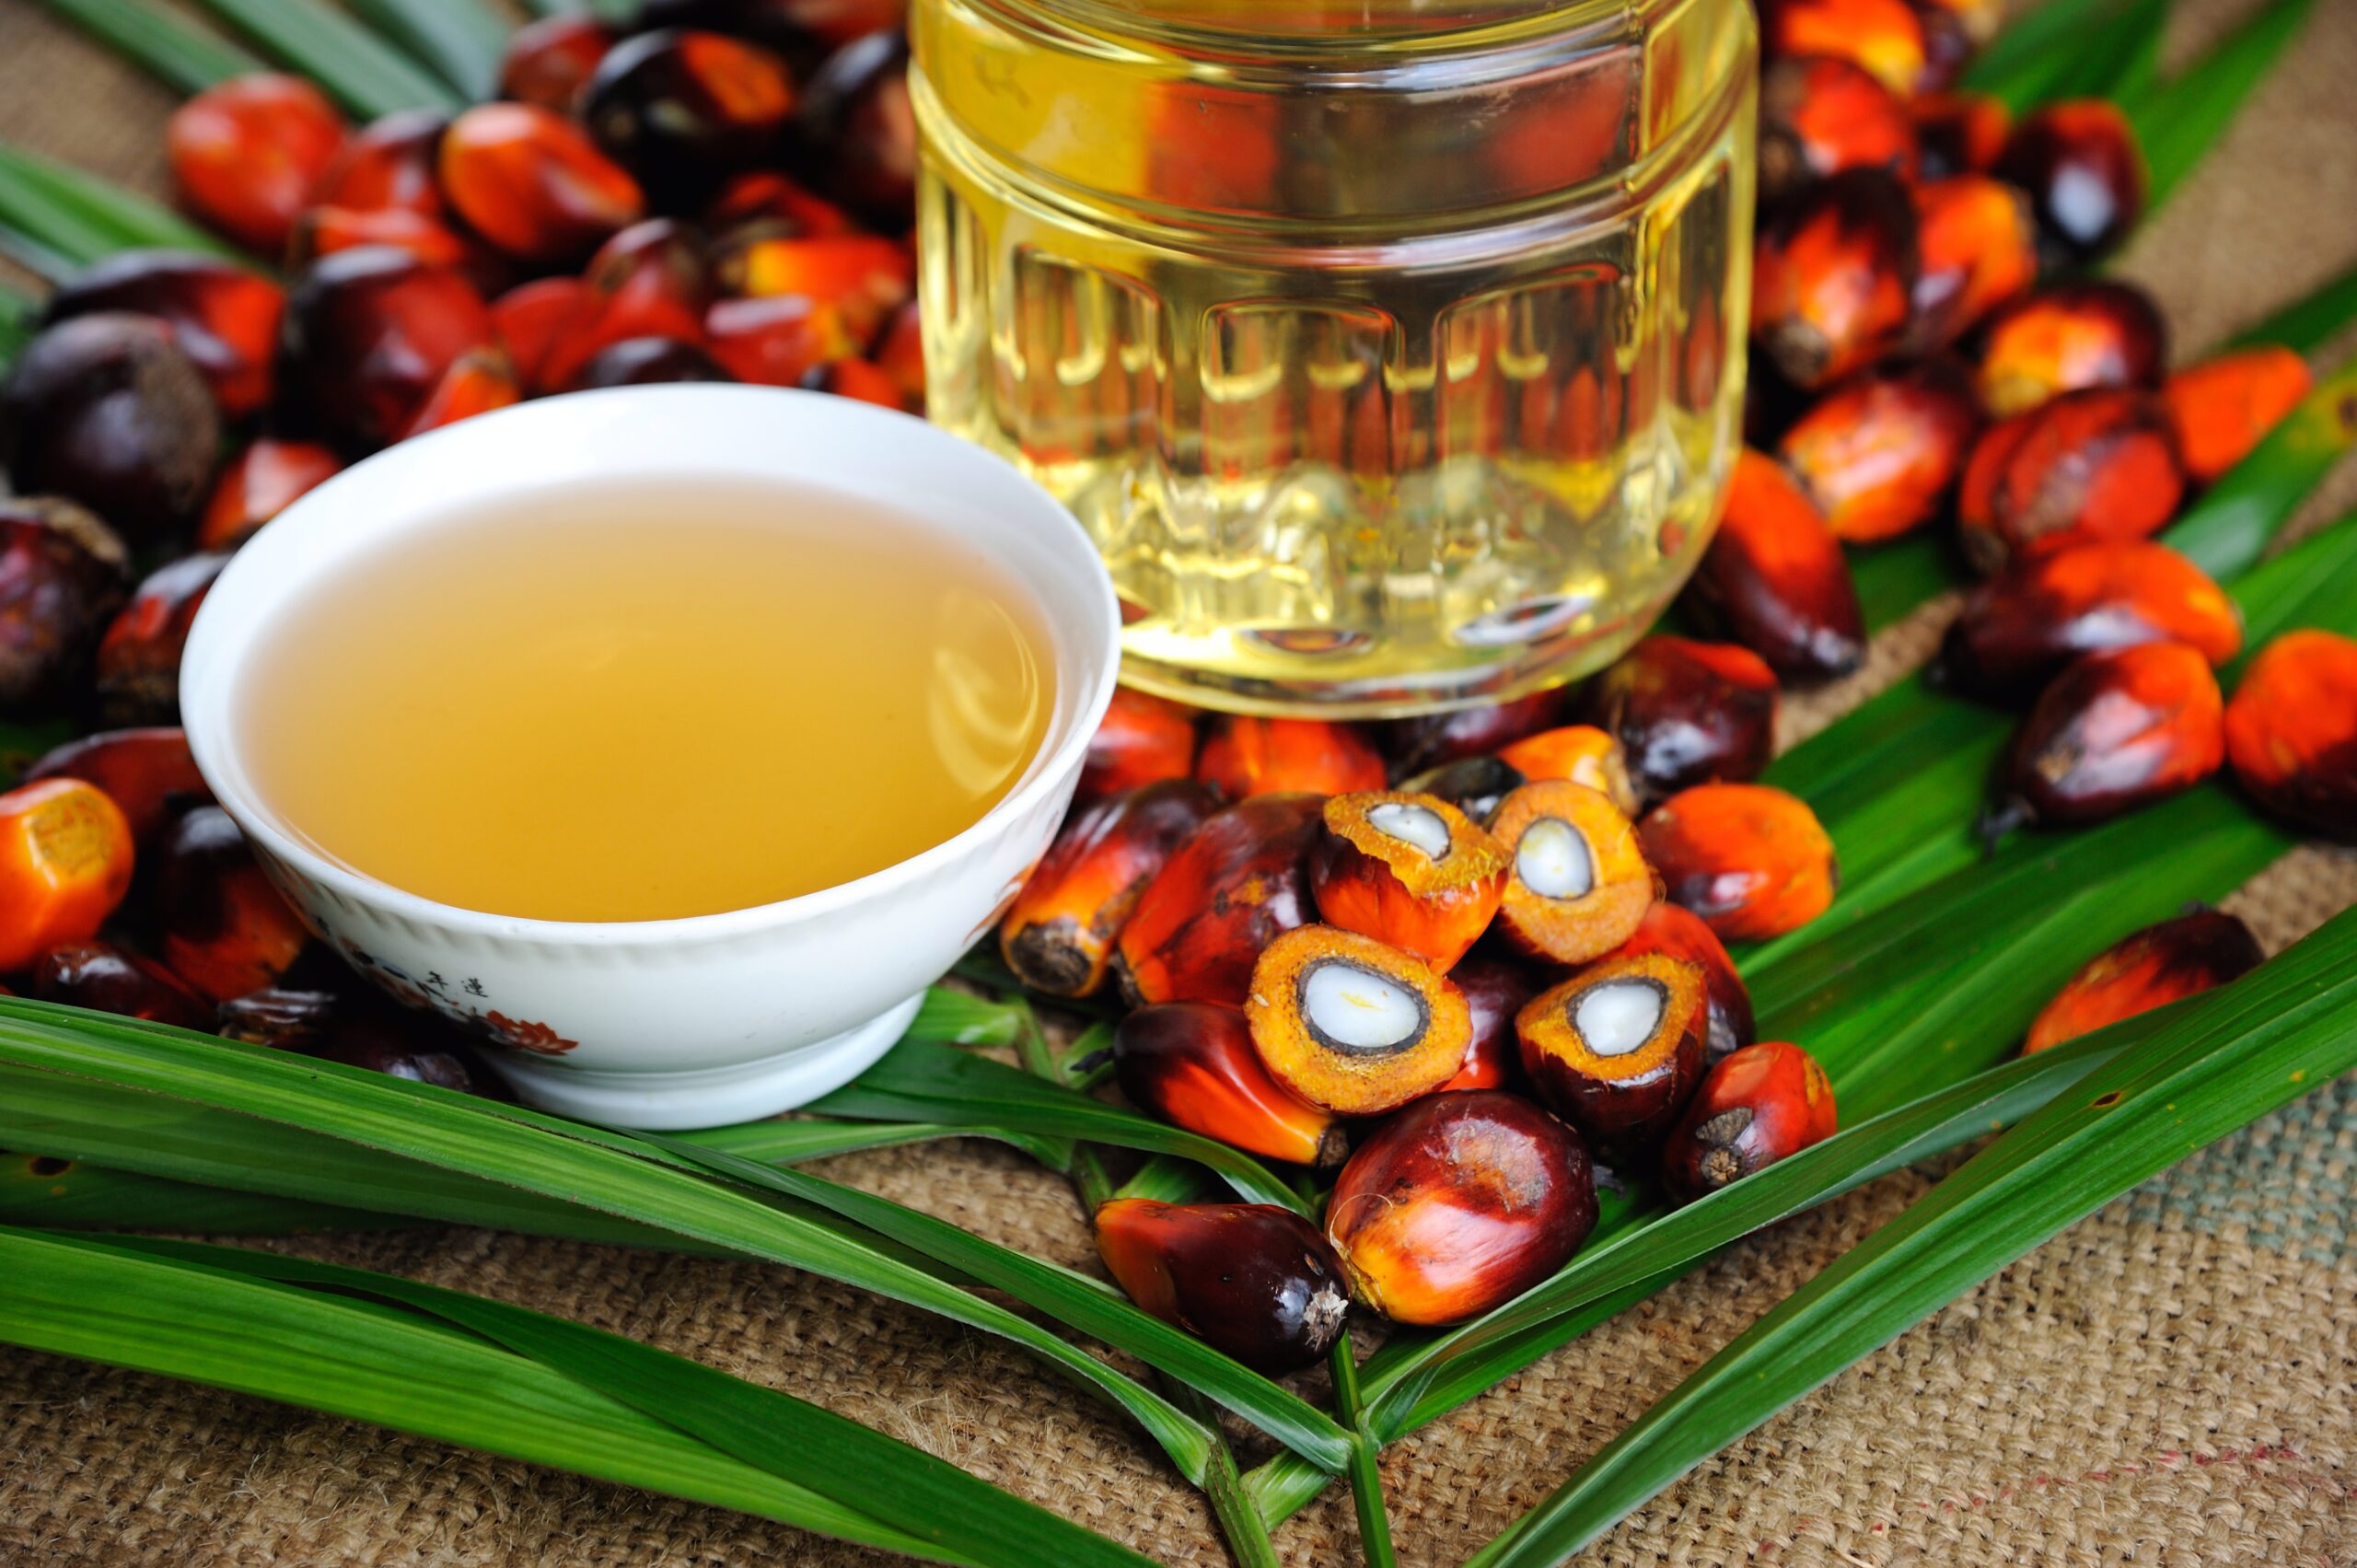 How blockchain can ensure sustainable practices in the palm oil industry